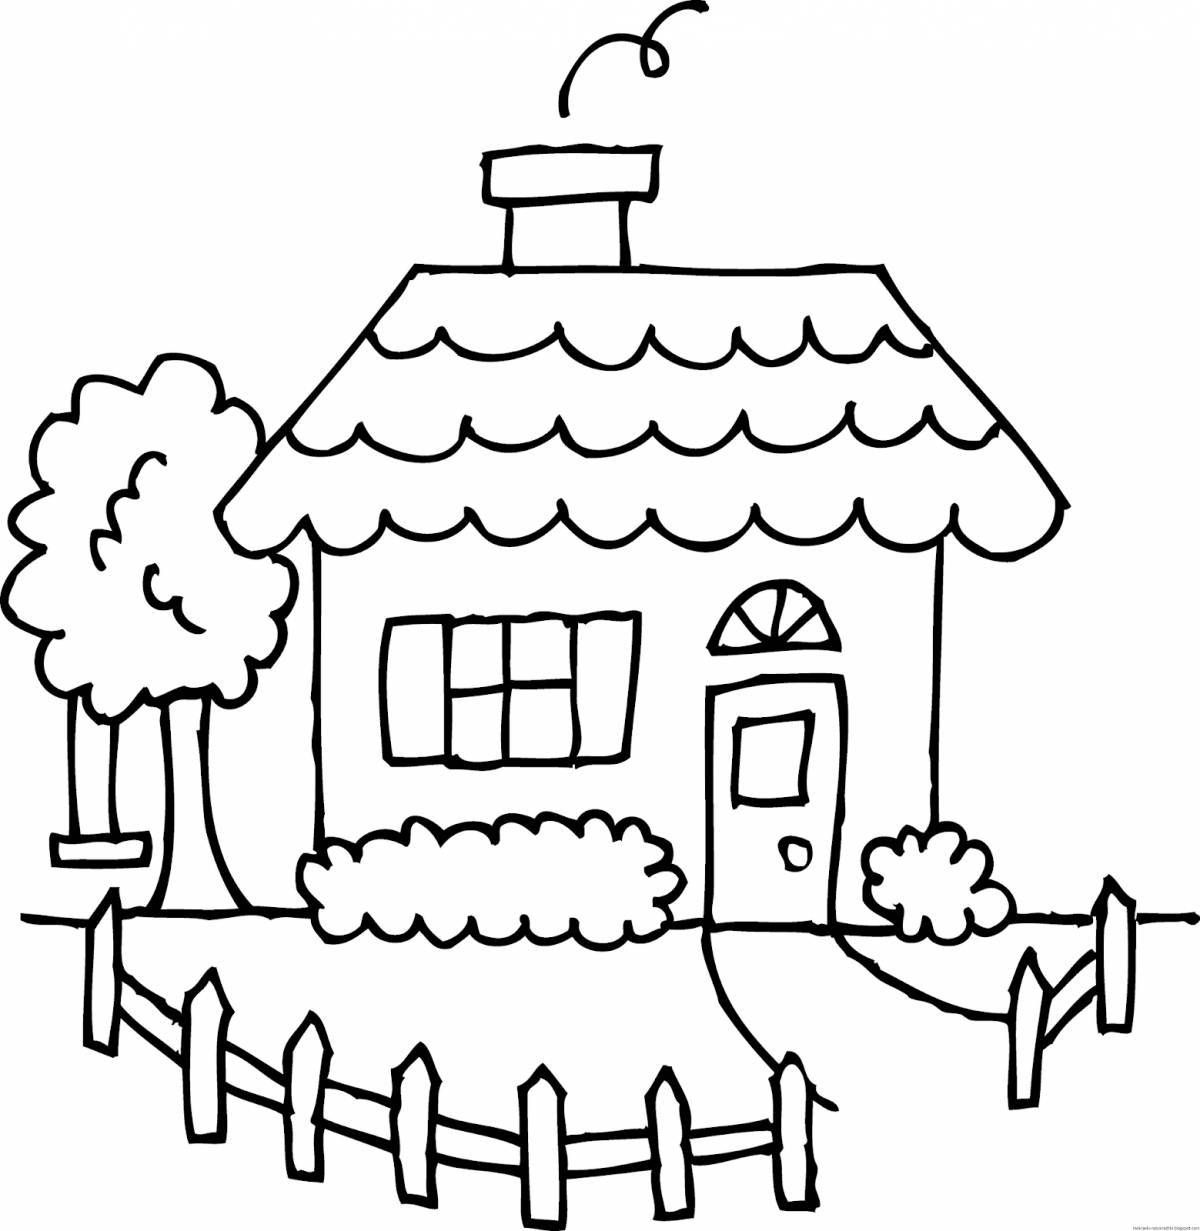 Impressive house coloring book for kids